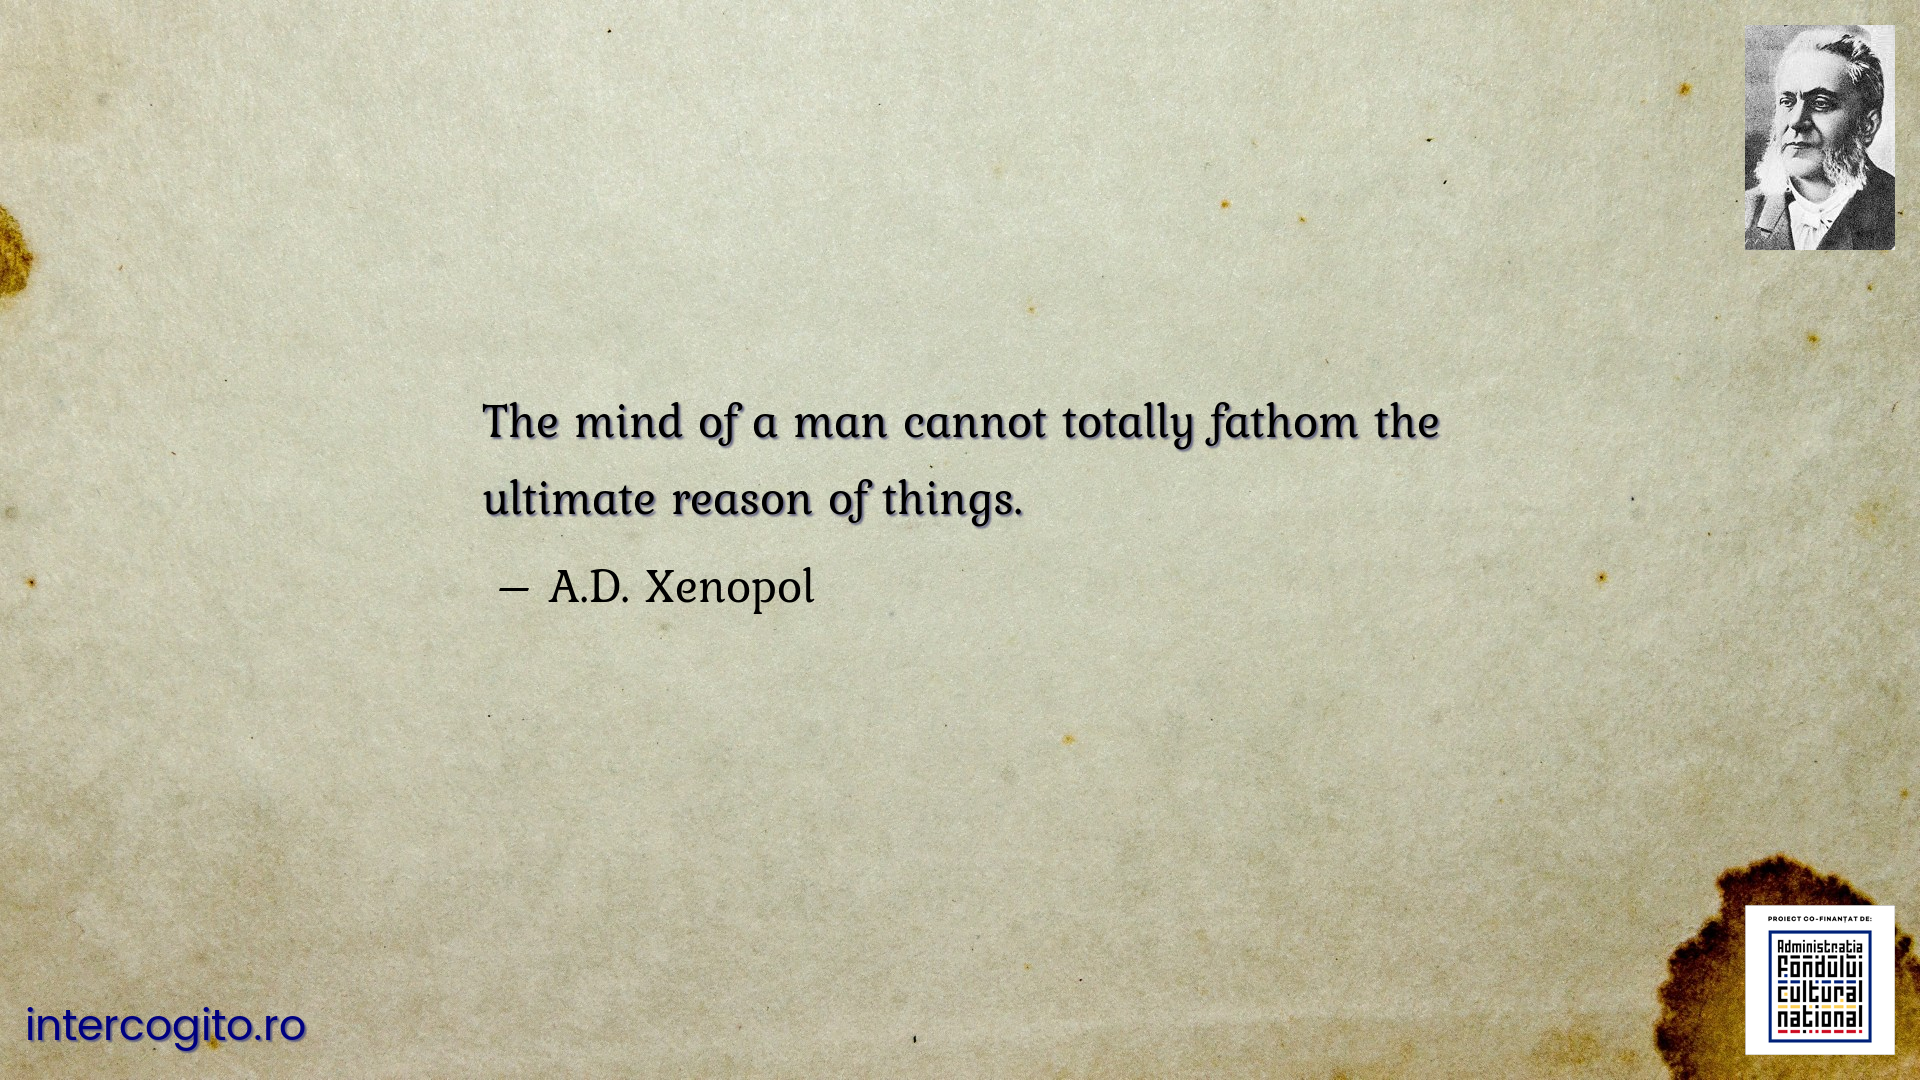 The mind of a man cannot totally fathom the ultimate reason of things.